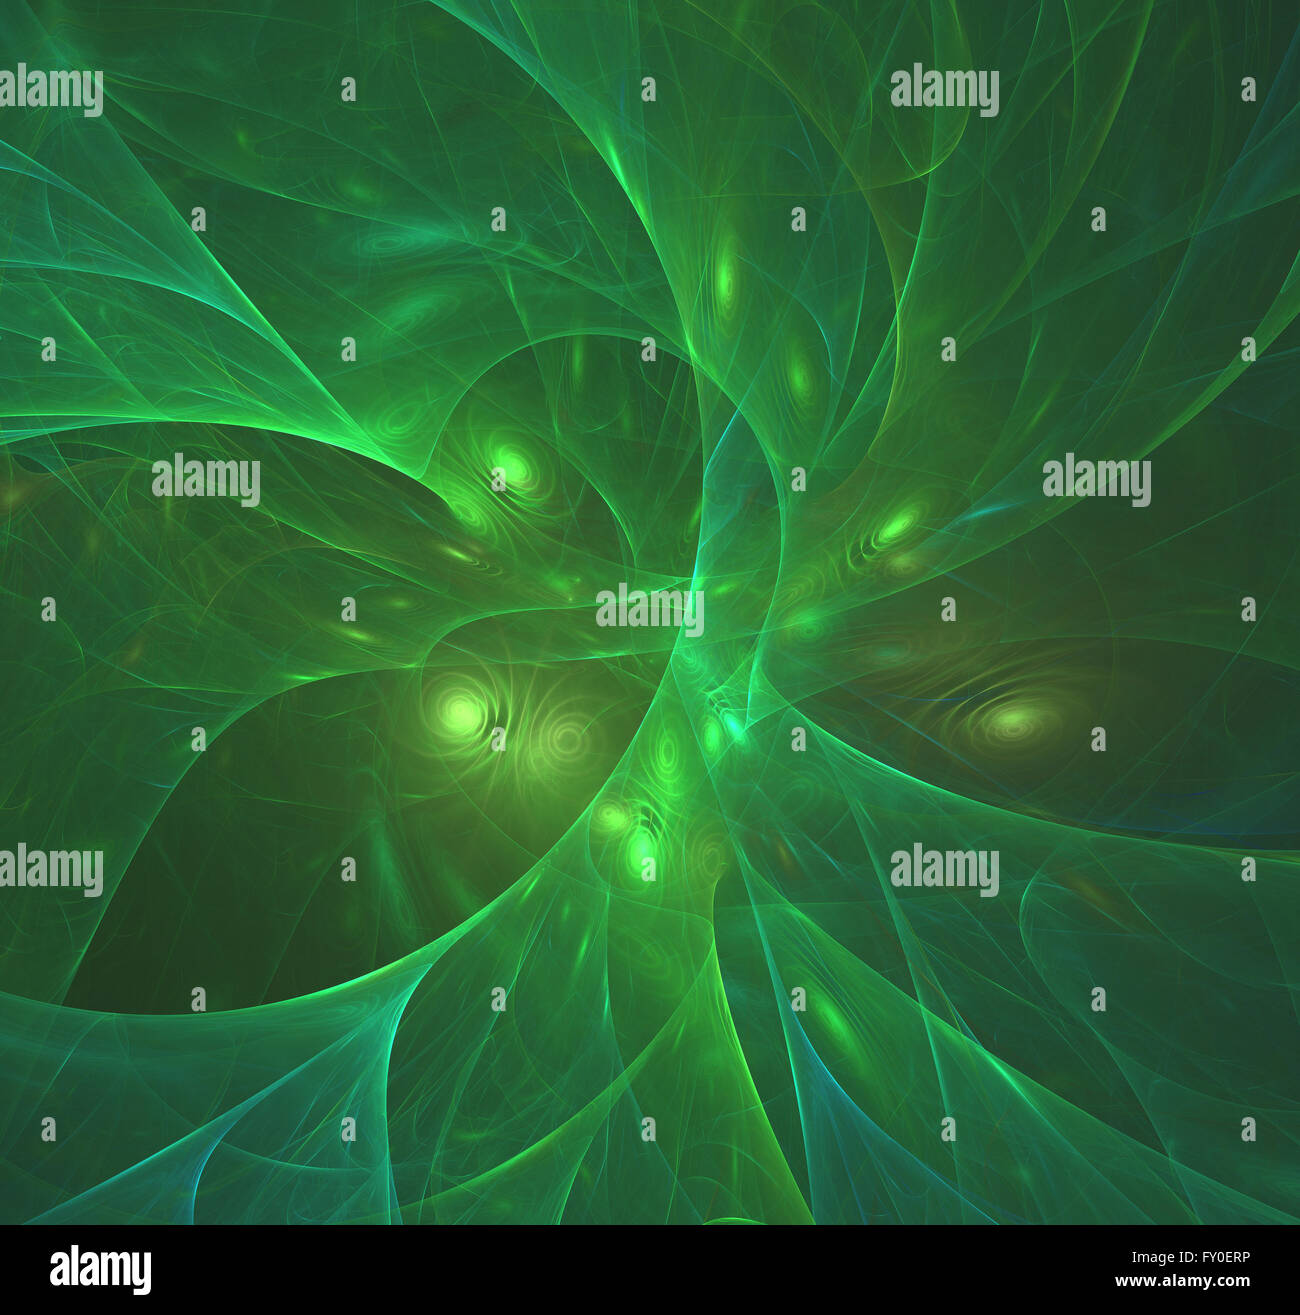 Abstract green fractal texture background, concept of mystery. Stock Photo